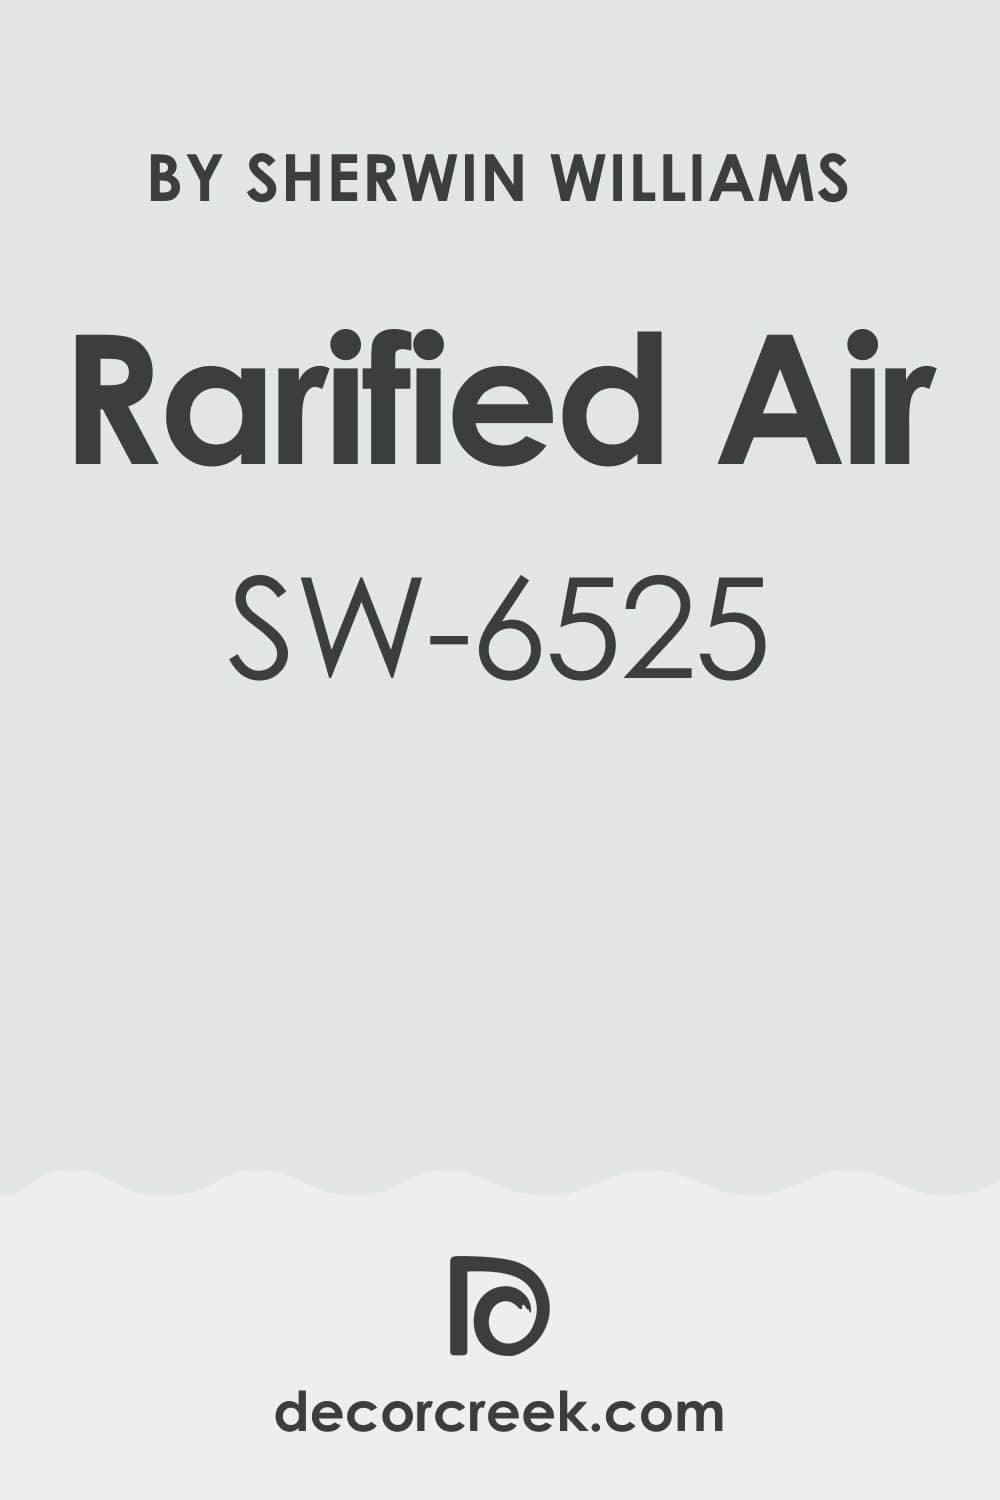 What Kind of Color Is Rarified Air SW-6525 by Sherwin-Williams?